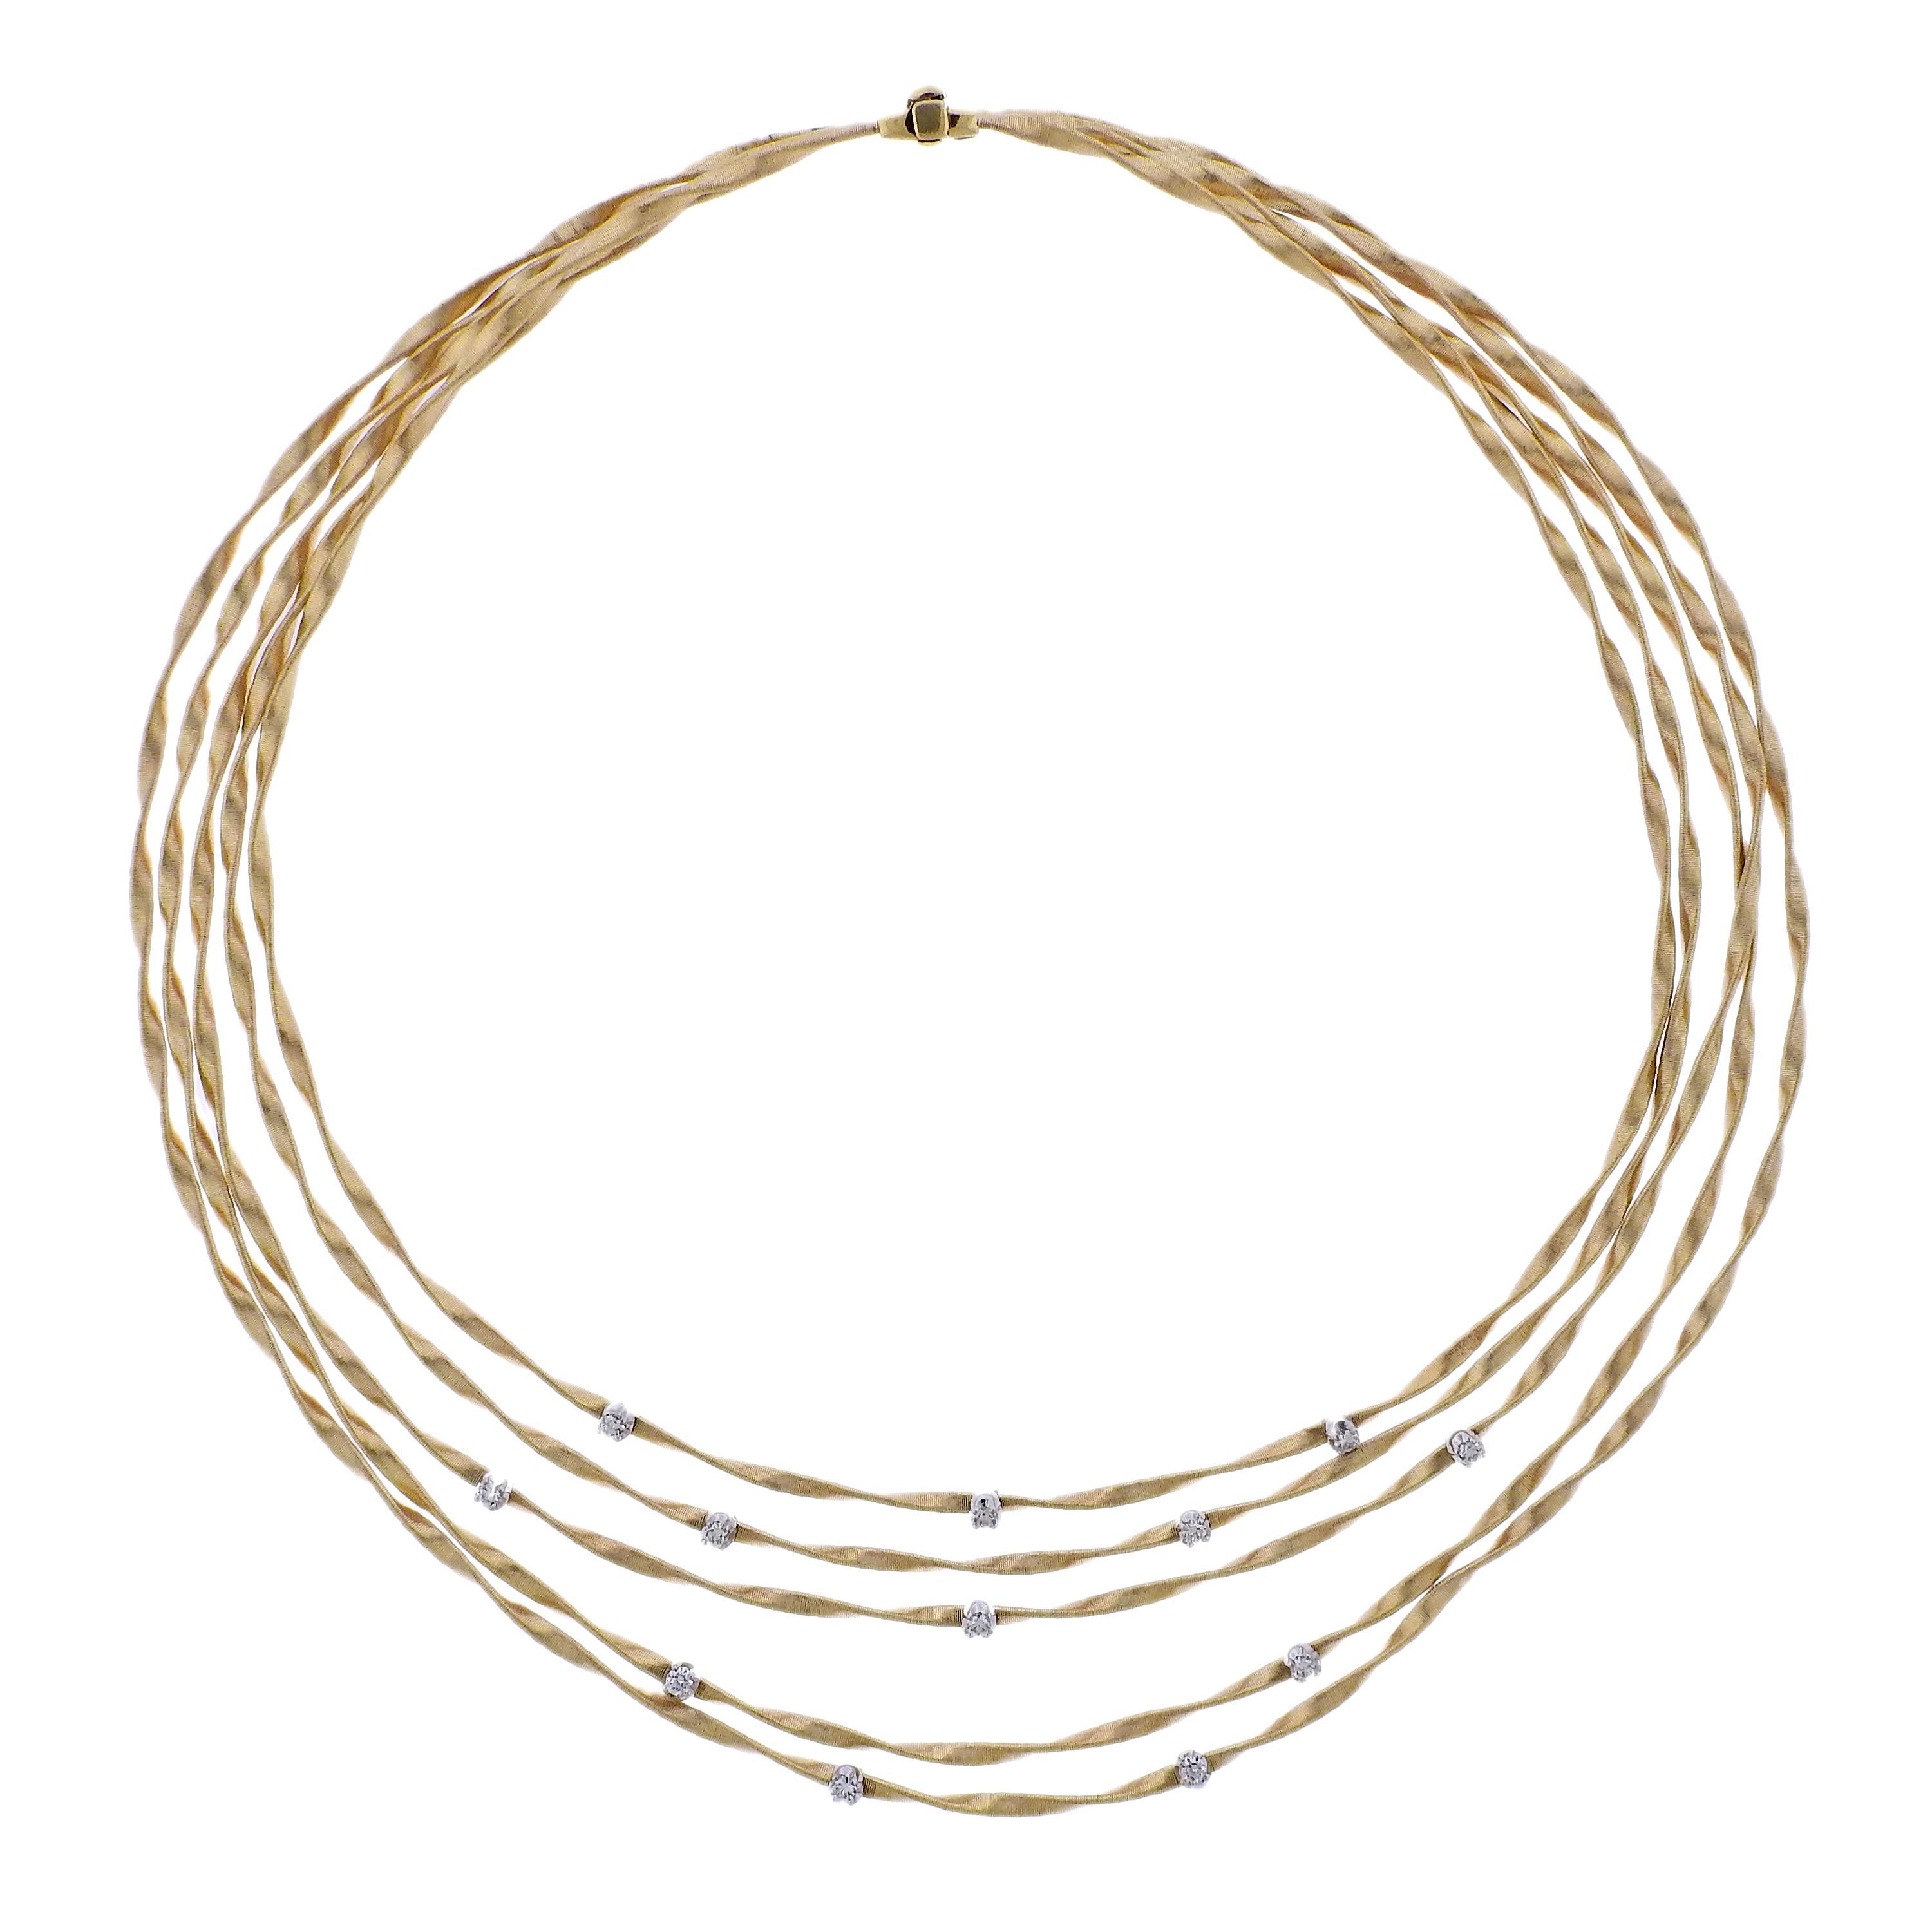 Marco Bicego Marrakech collection 18K gold five strand necklace, set with 0.60ctw of VS/G white diamonds. Necklace measure 16